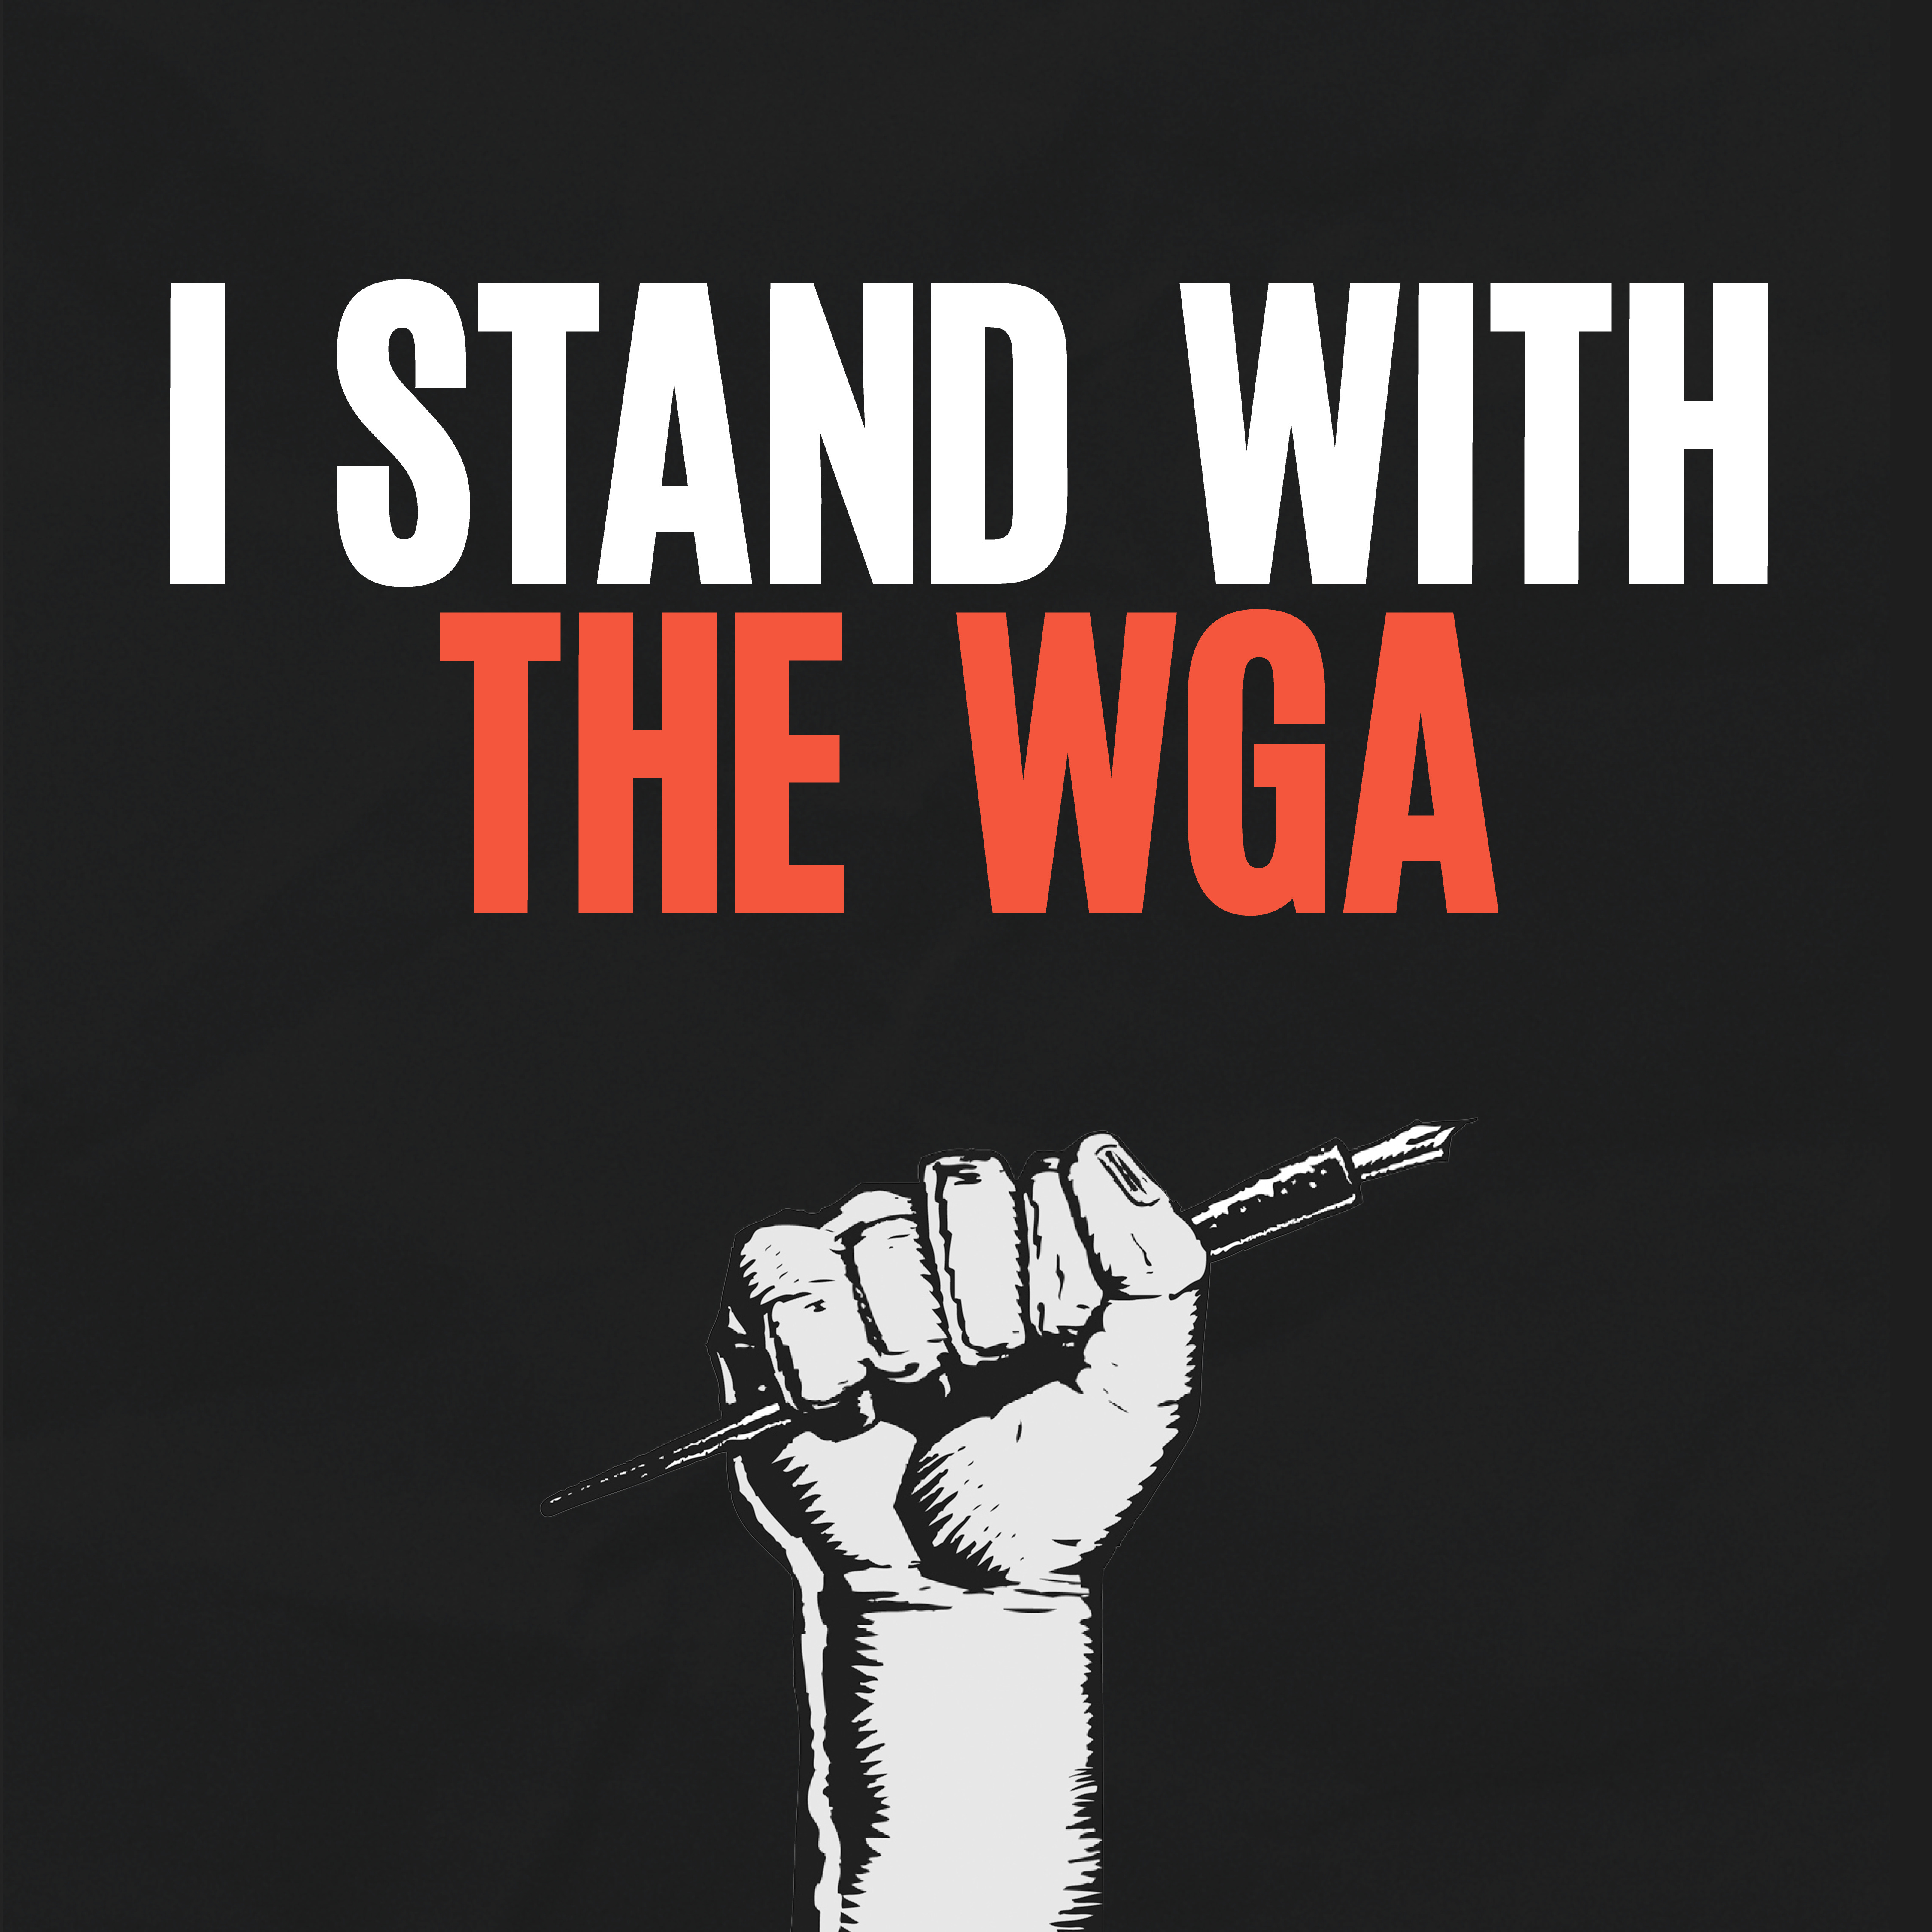 I stand with the WGA slogan featuring hand in fist straight up, holding tight onto a pen